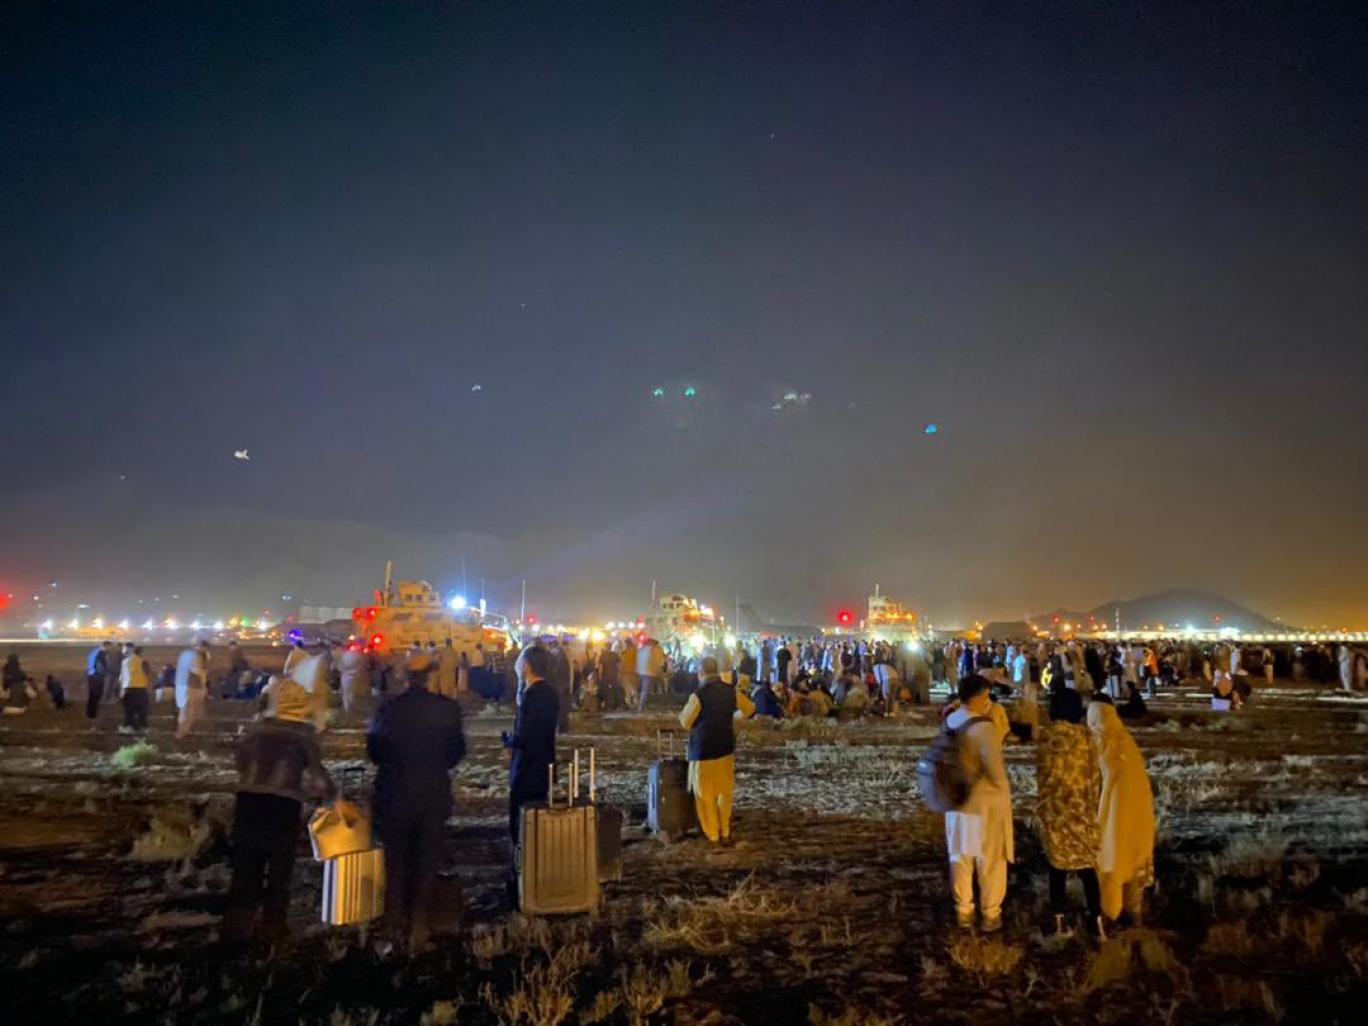 a group of people standing in a field at night